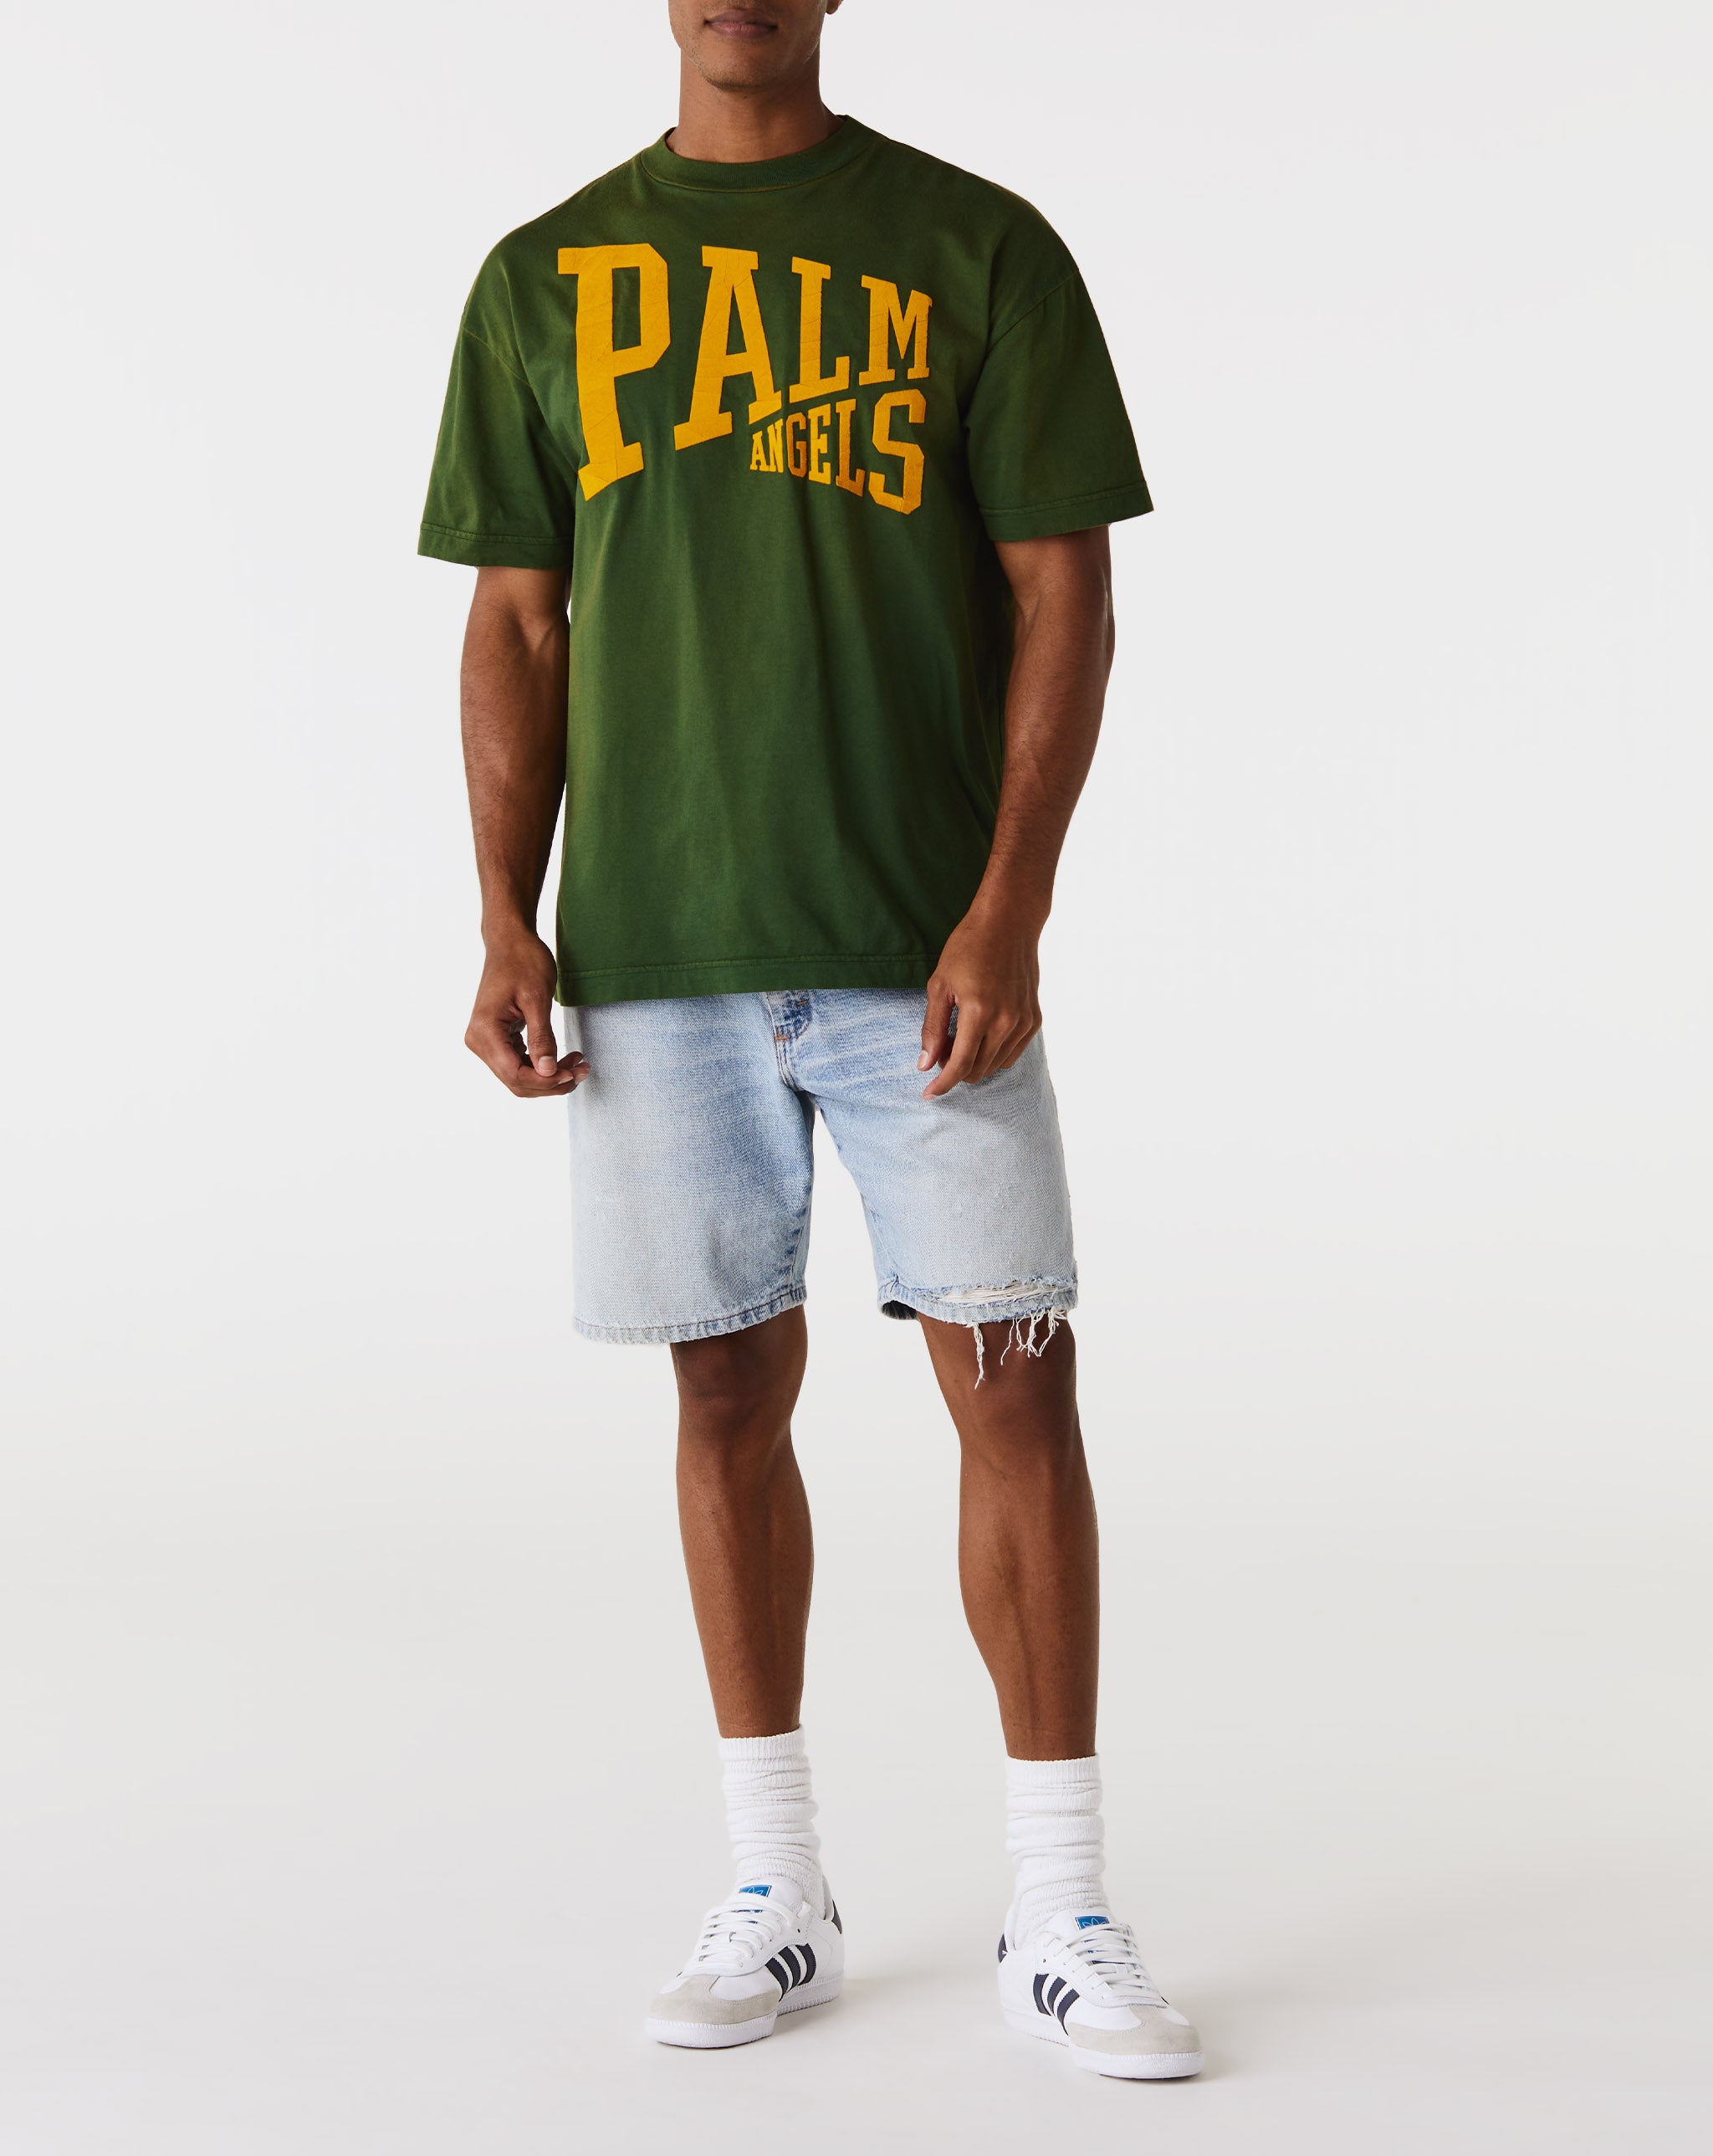 Palm Angels College T-Shirt - Rule of Next Apparel